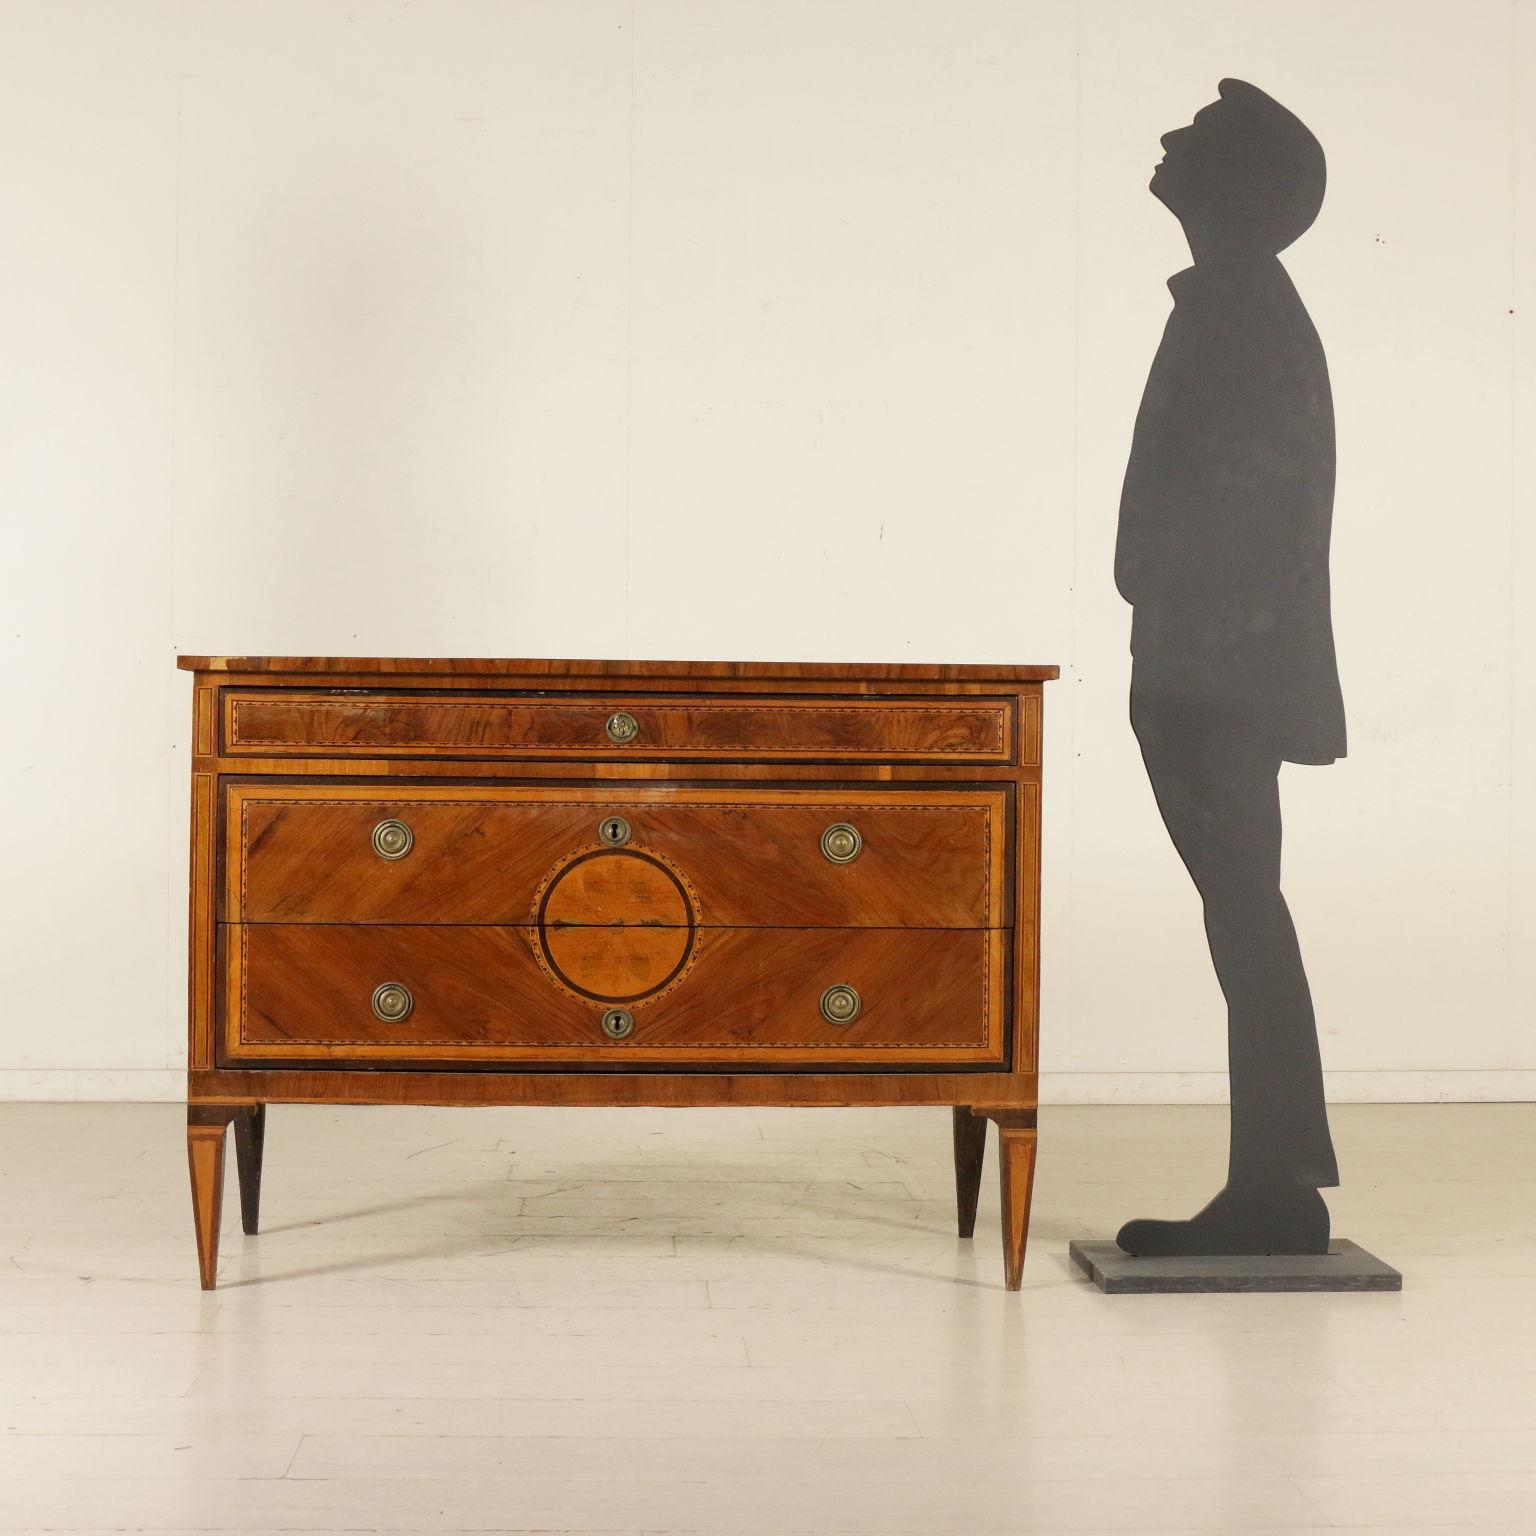 An elegant neoclassical chest of drawers, pyramidal legs. Two drawers with rose in the middle, quadripartite, plus a small drawer under the top. Cathedral walnut veneered reserves with inlaid threads. Top with inlaid rose. Maple and wood.